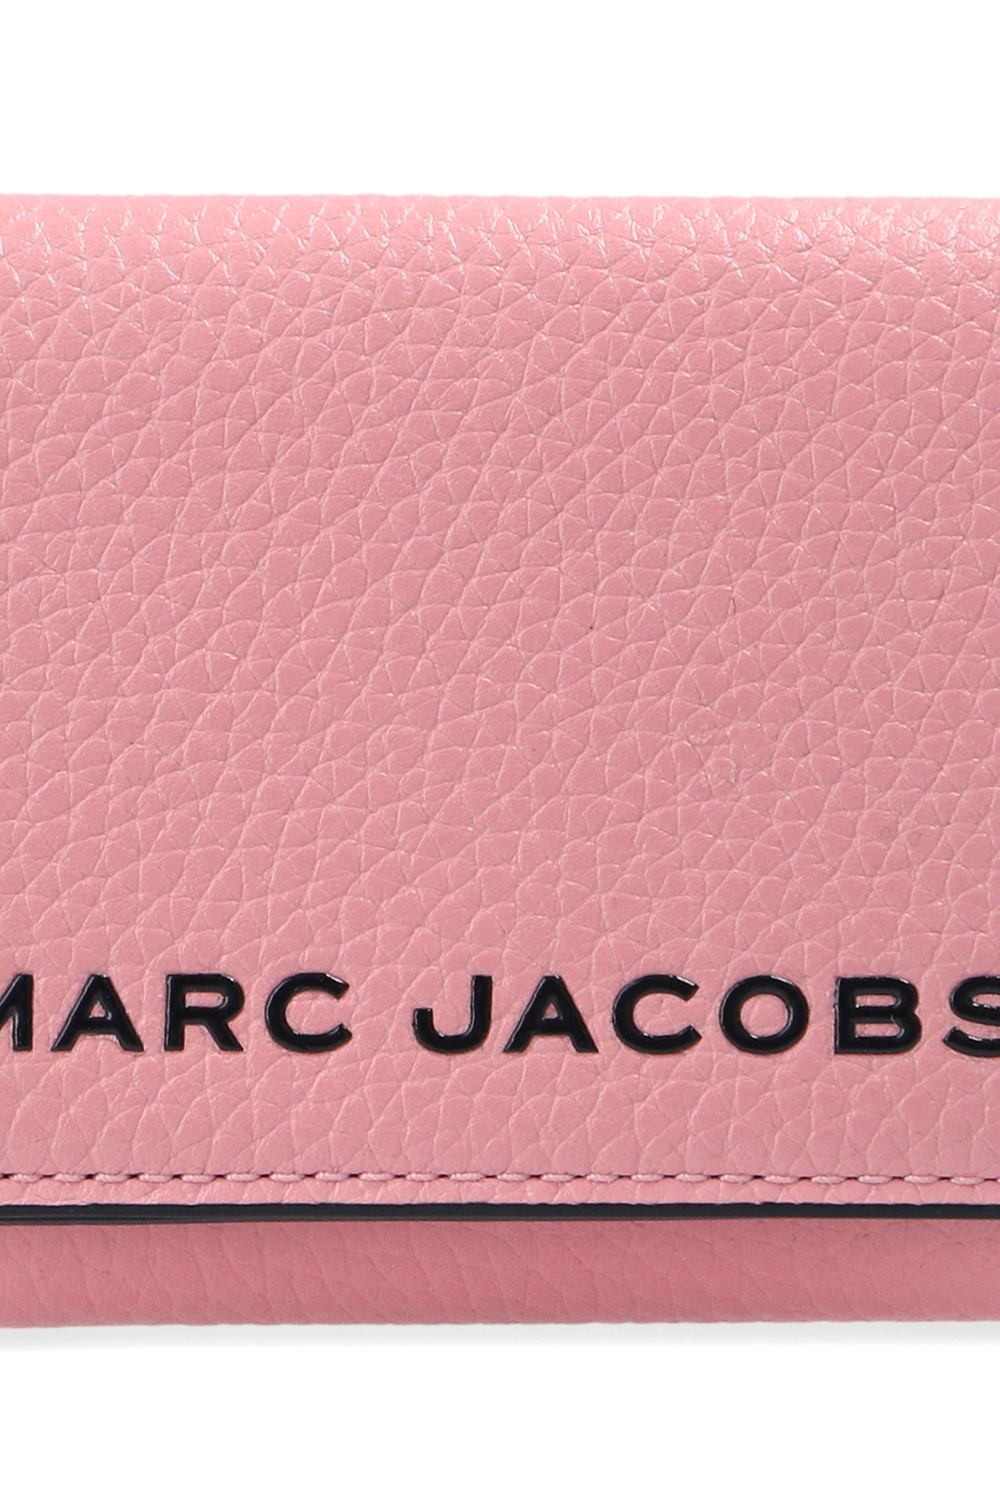 Marc Jacobs (The) The Marc Jacobs Kids Abito metallizzato Rosa